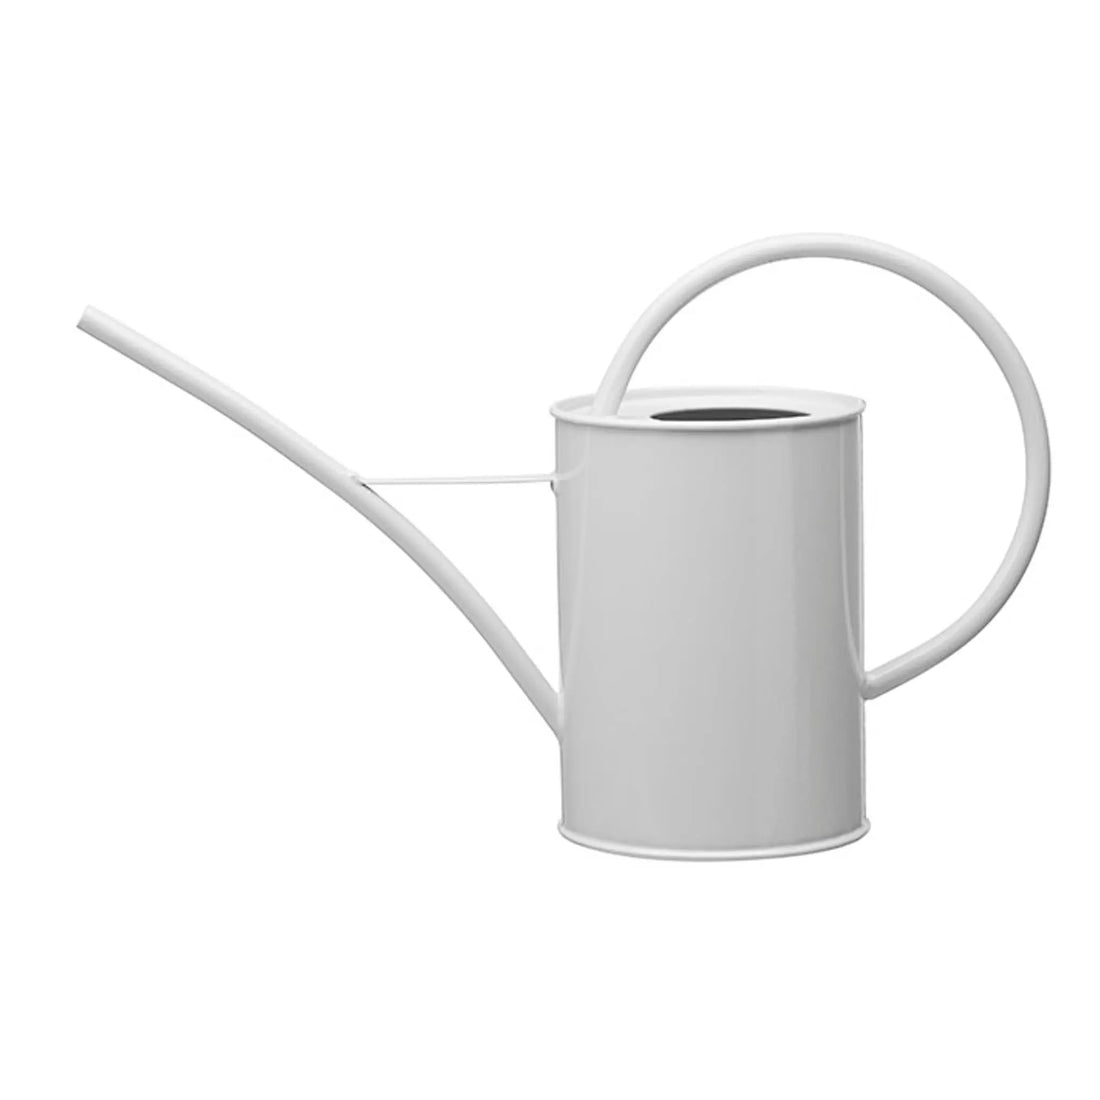 Savanna Watering Can Wikholm